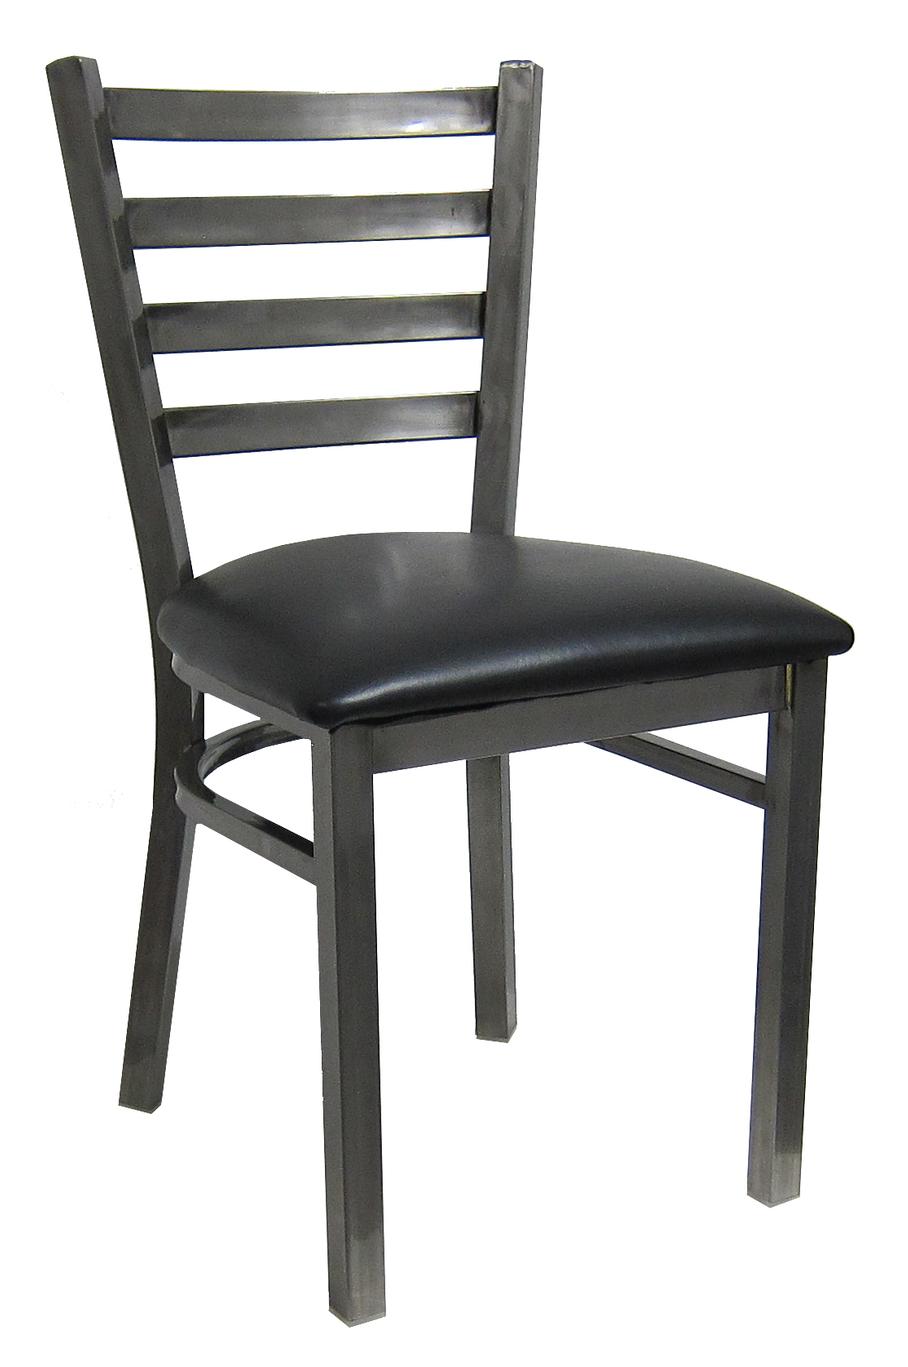 H&D Commercial Seating 6144 - Item 168854